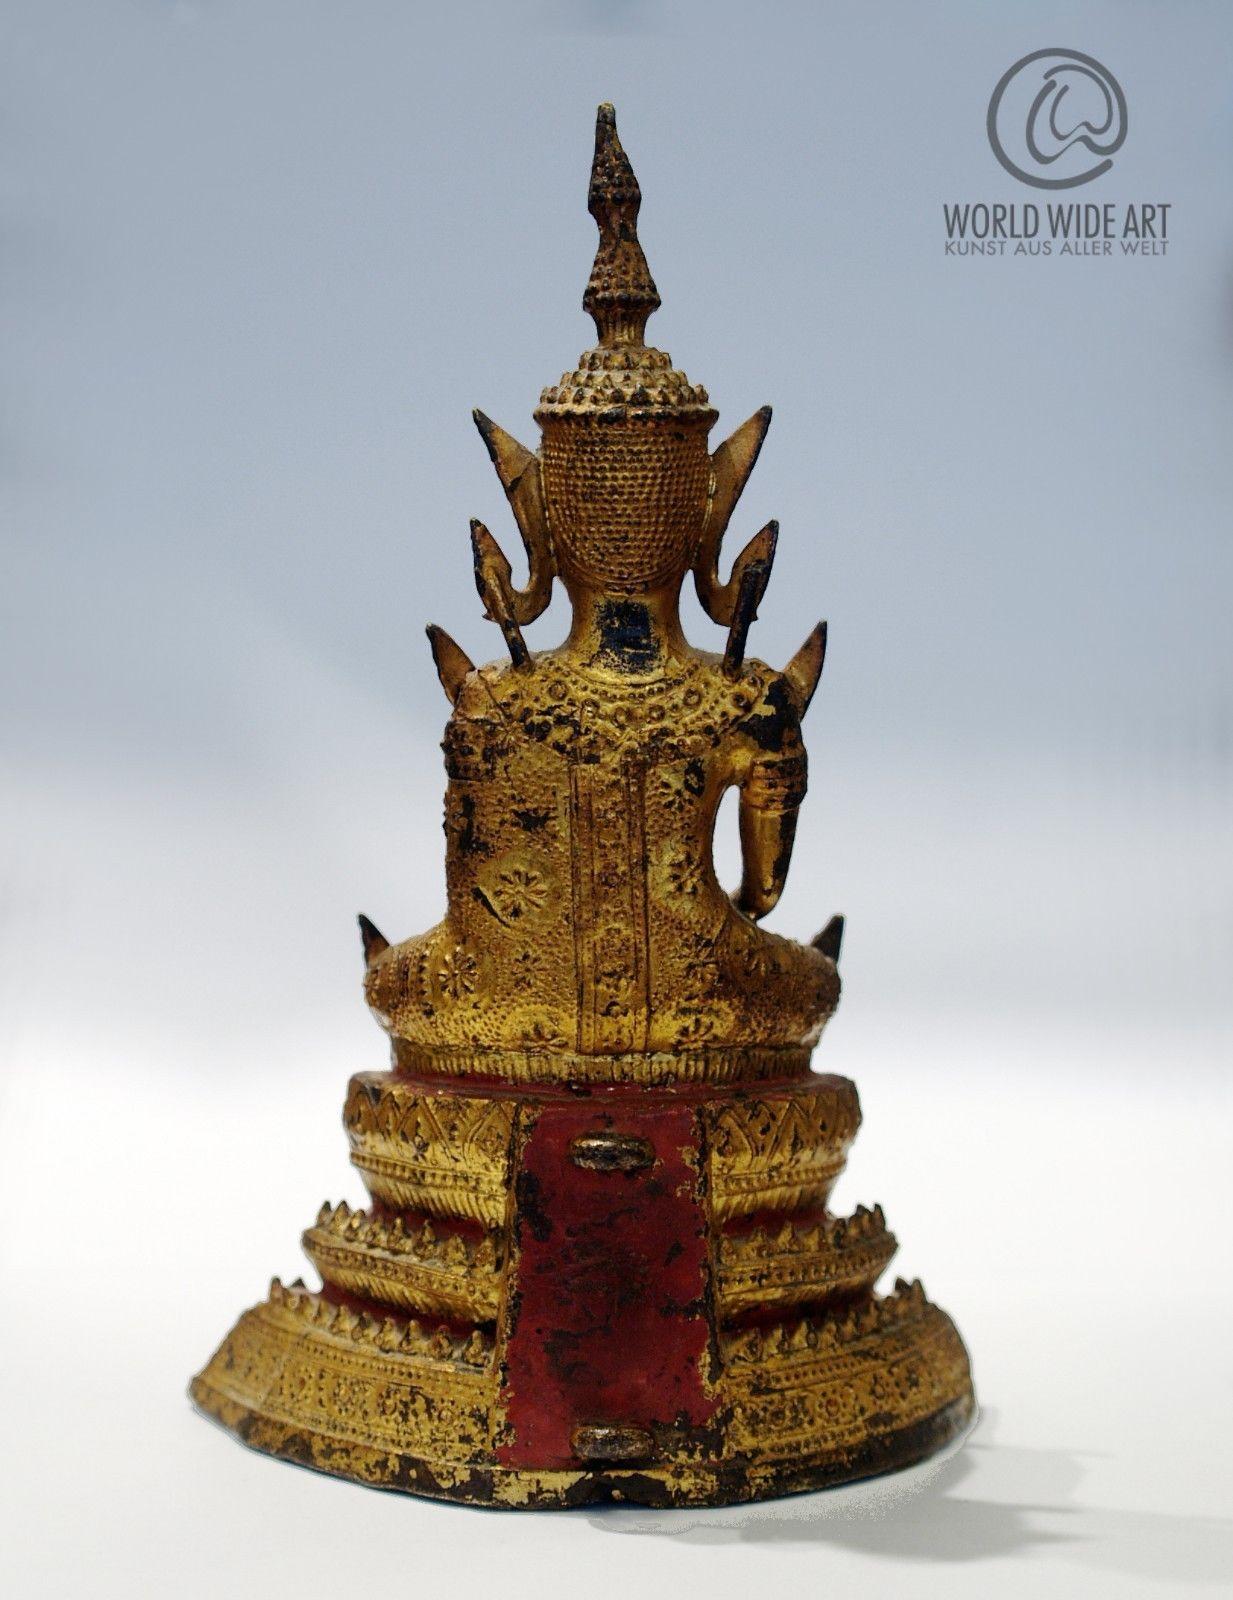 EXCEPTIONAL ANTIQUE BUDDHA, BURMA, EARLY 19th CENTURY, GILDED BRONZE For Sale 2